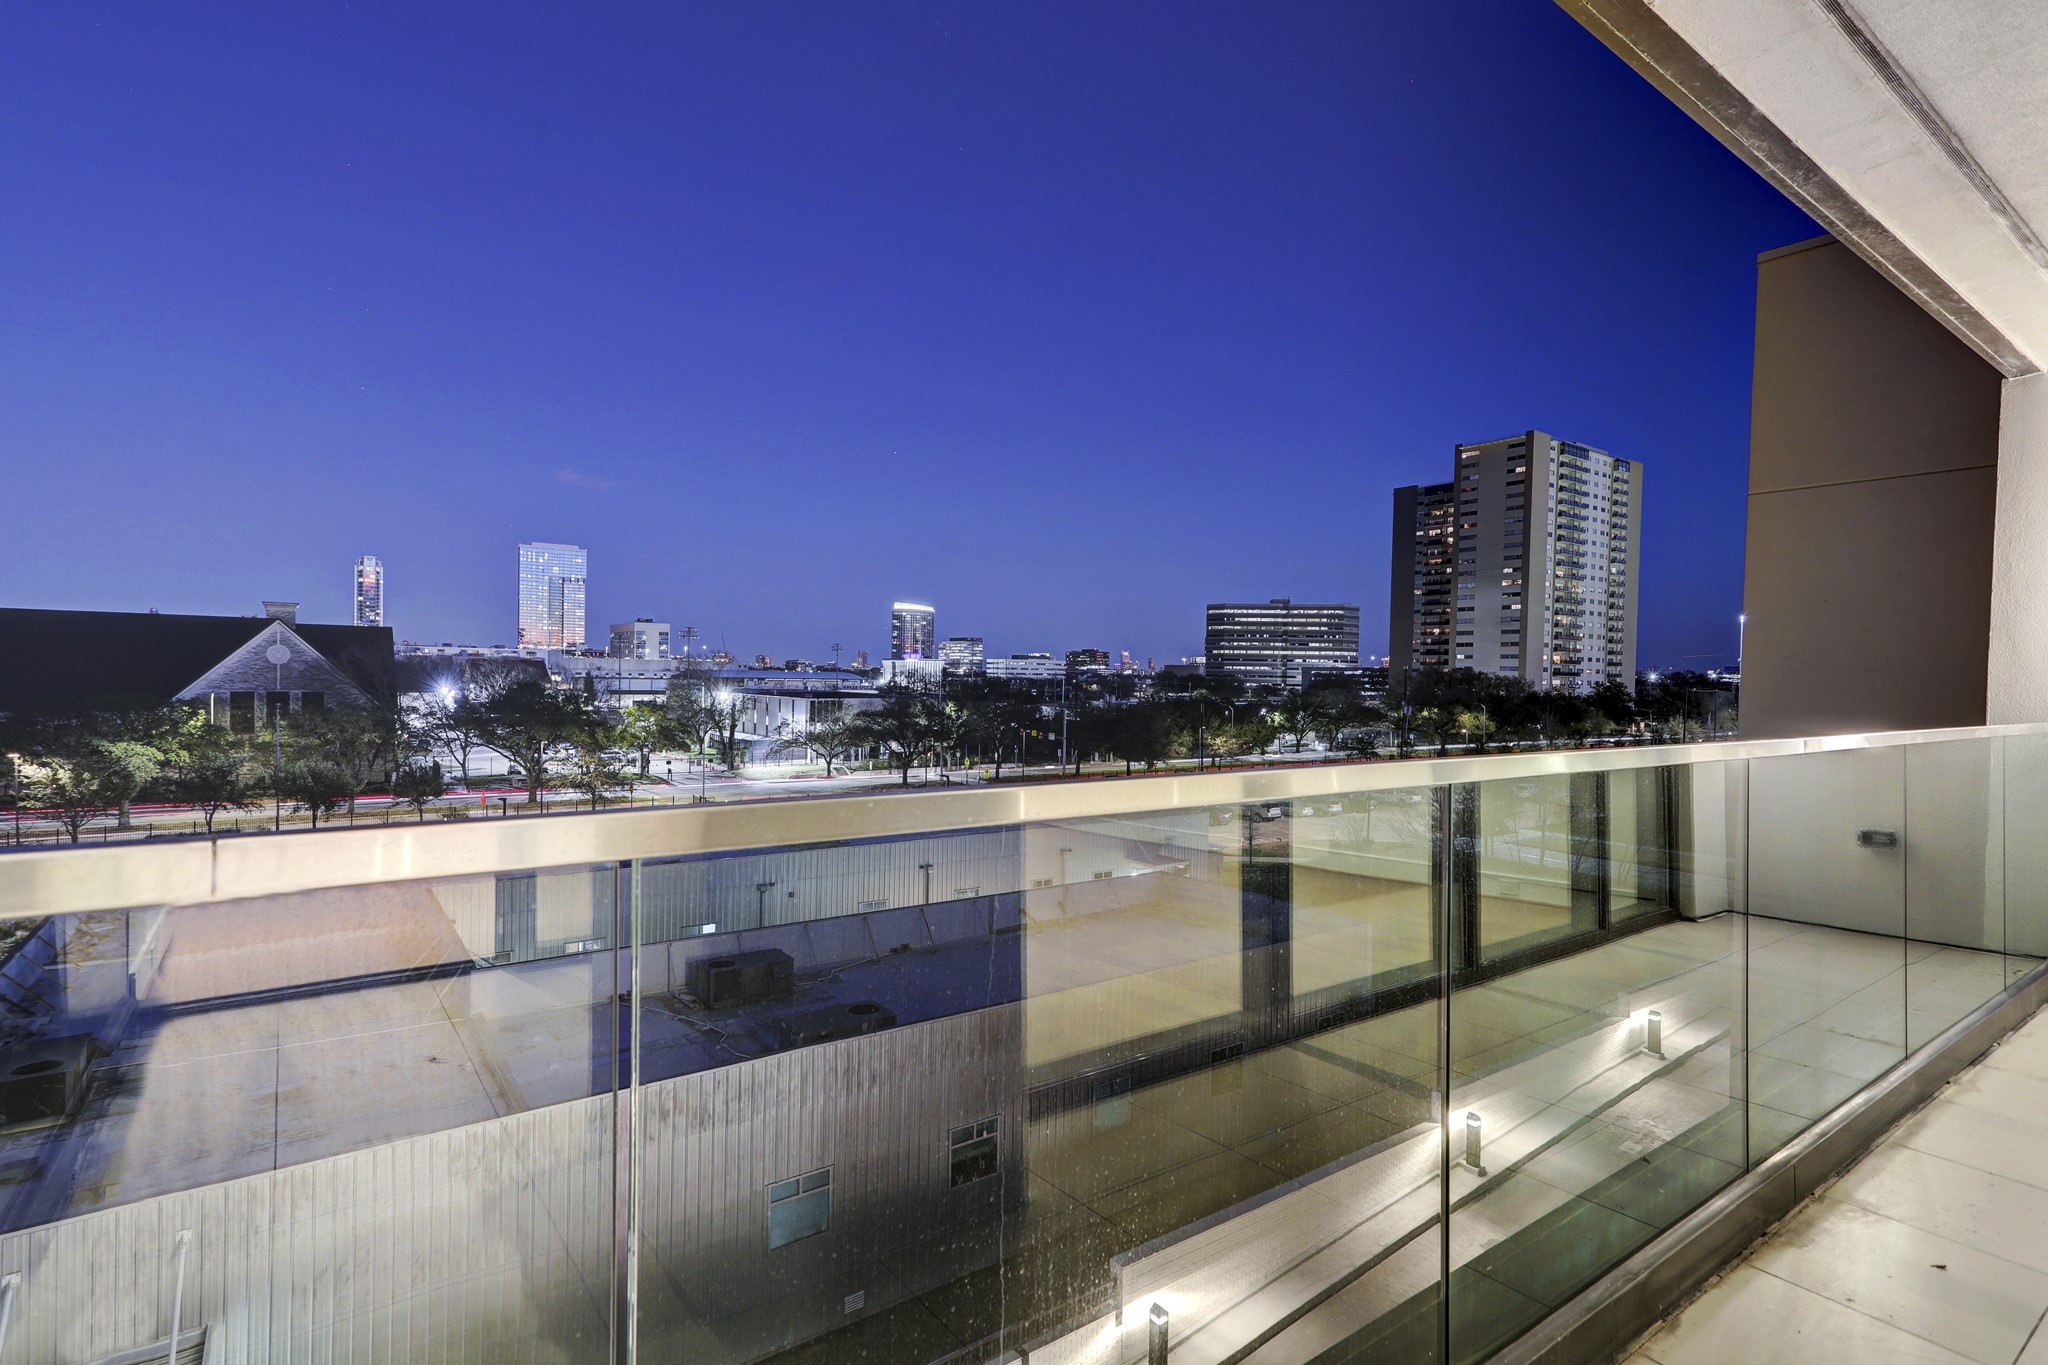 Host your next gathering surrounded by Houston skyline views, or enjoy after-dinner drinks under the stars.